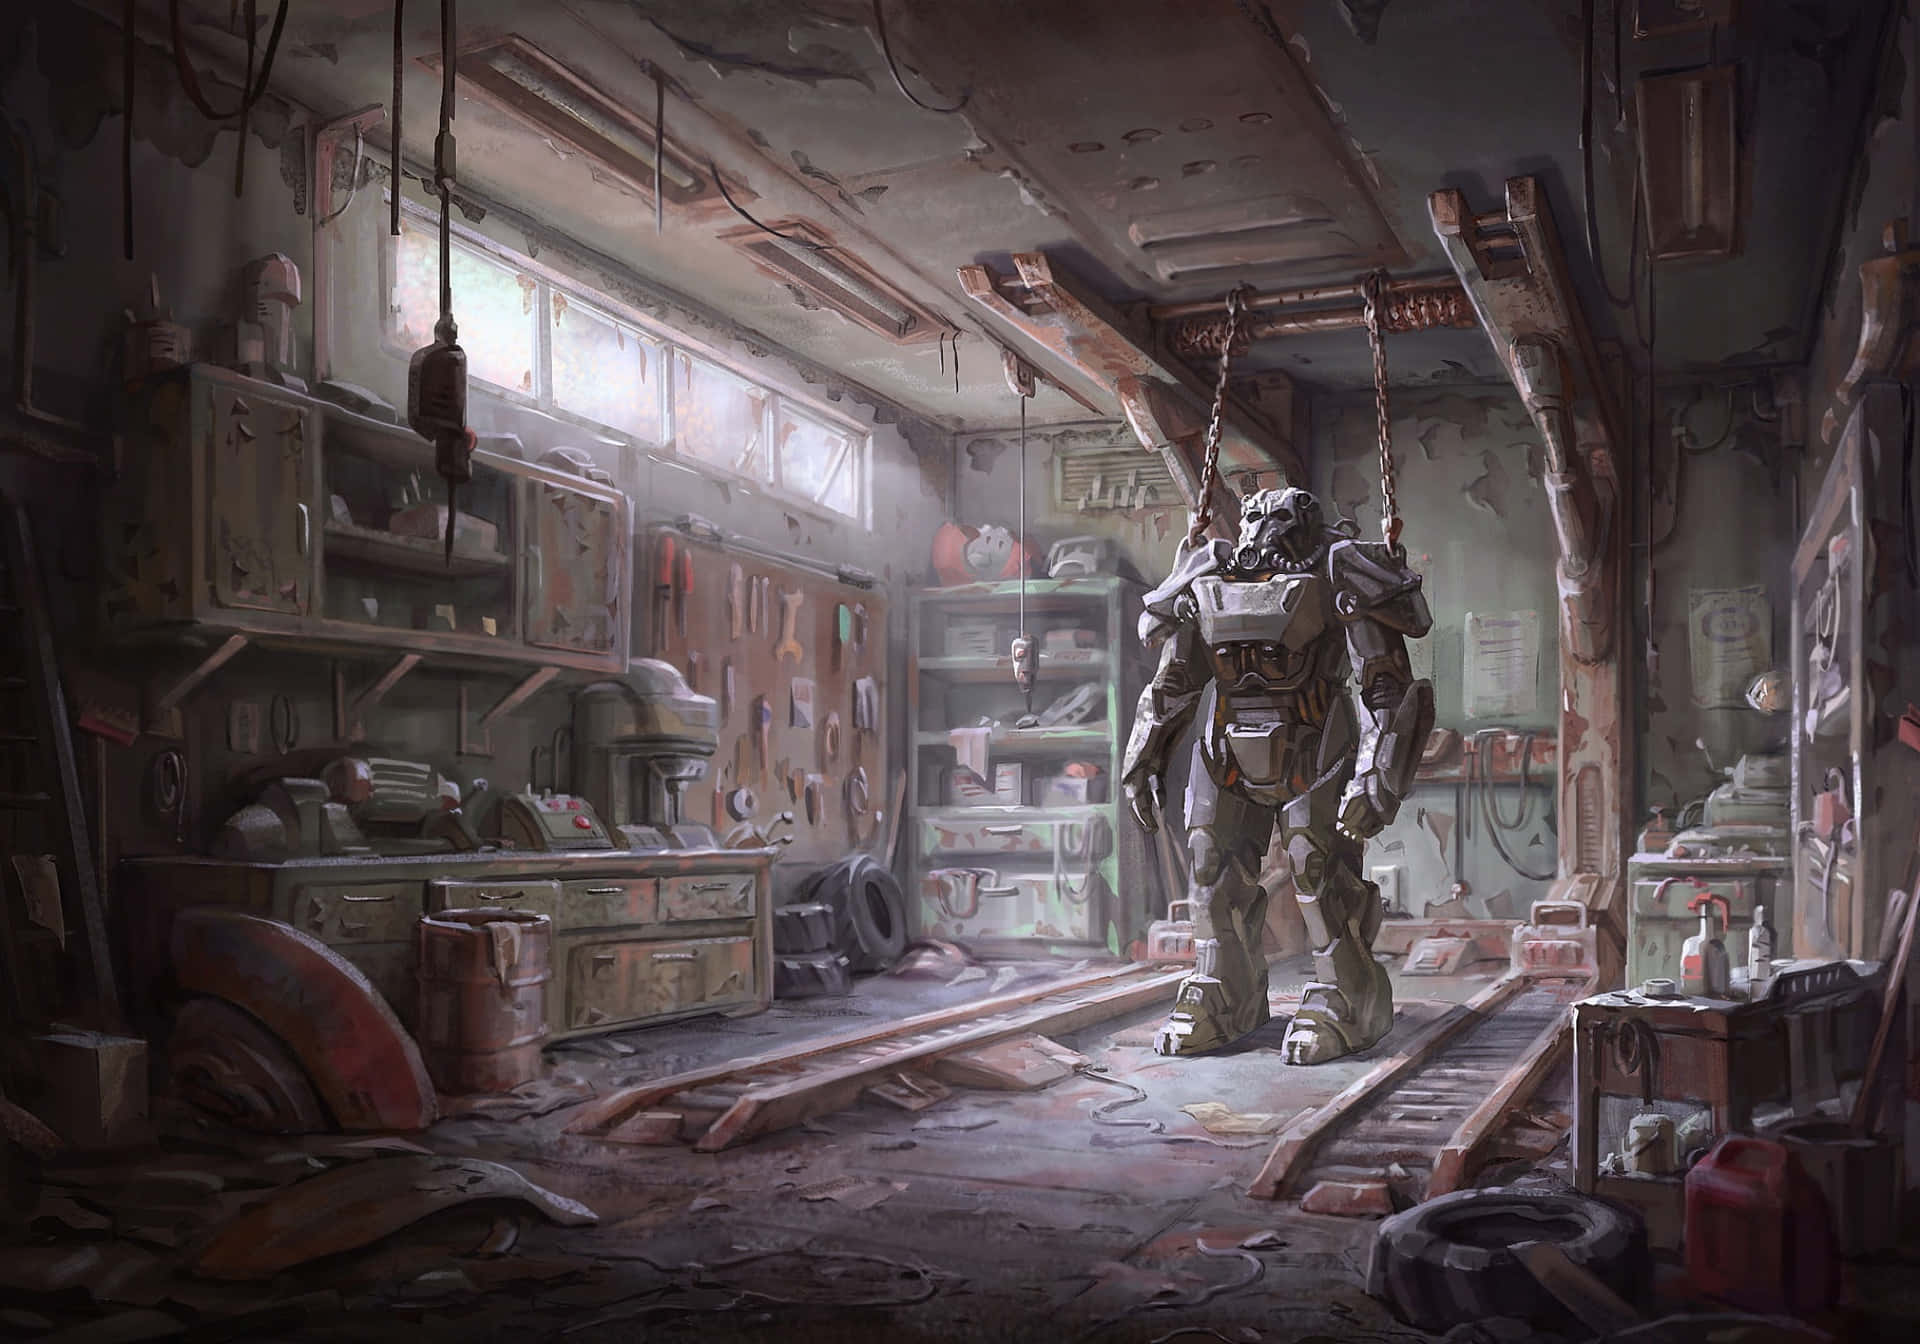 Intense Fallout 4 Power Armor in Action Wallpaper